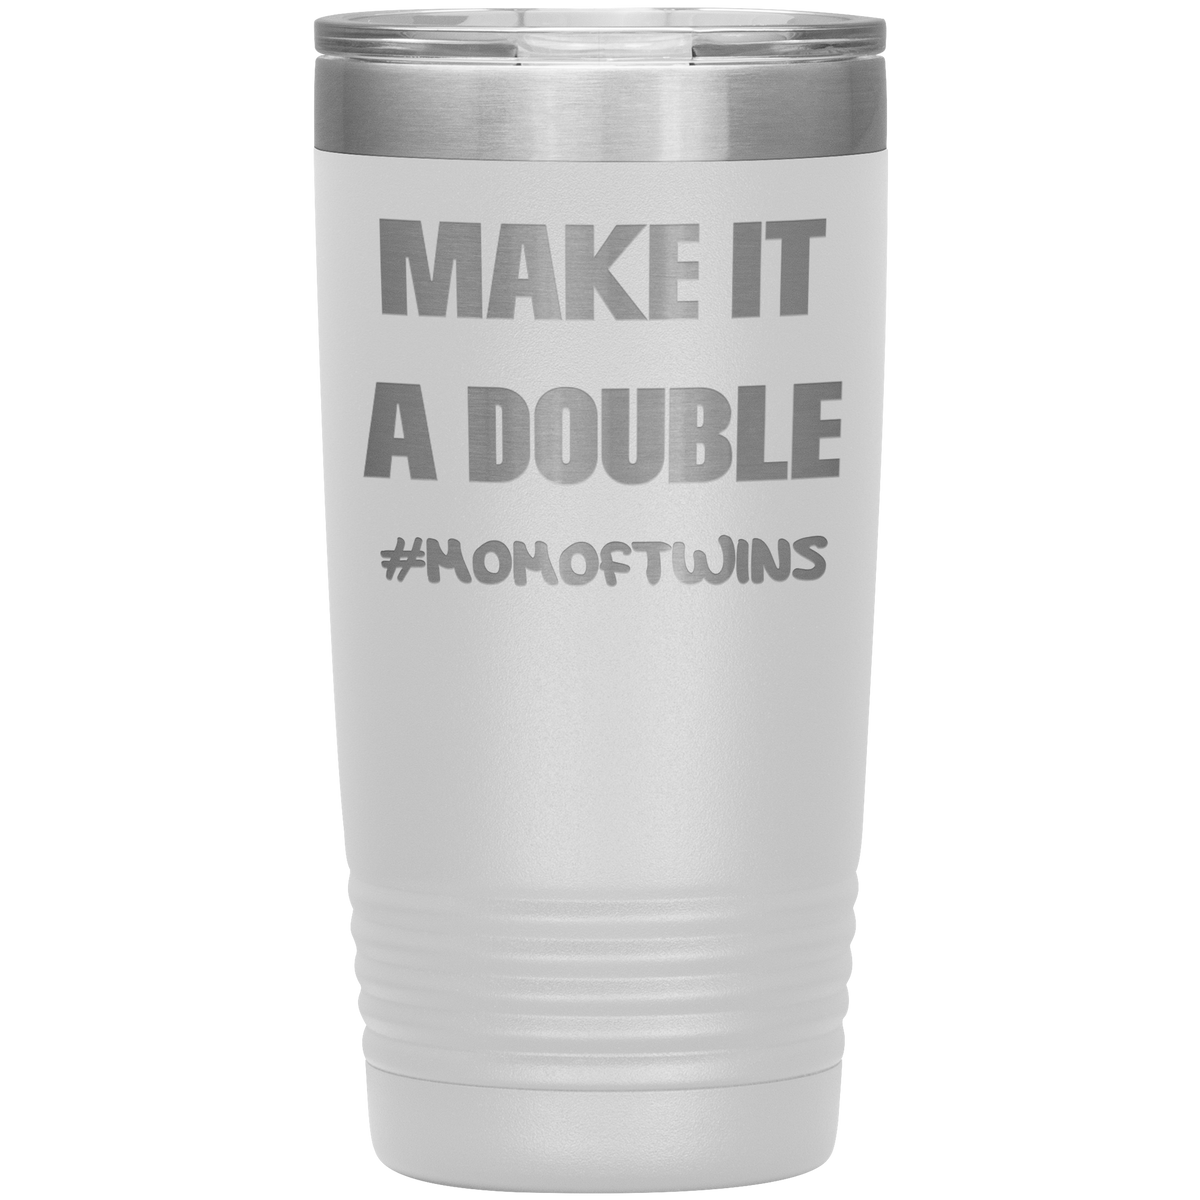 Make It A Double #momoftwins Engraved Tumbler